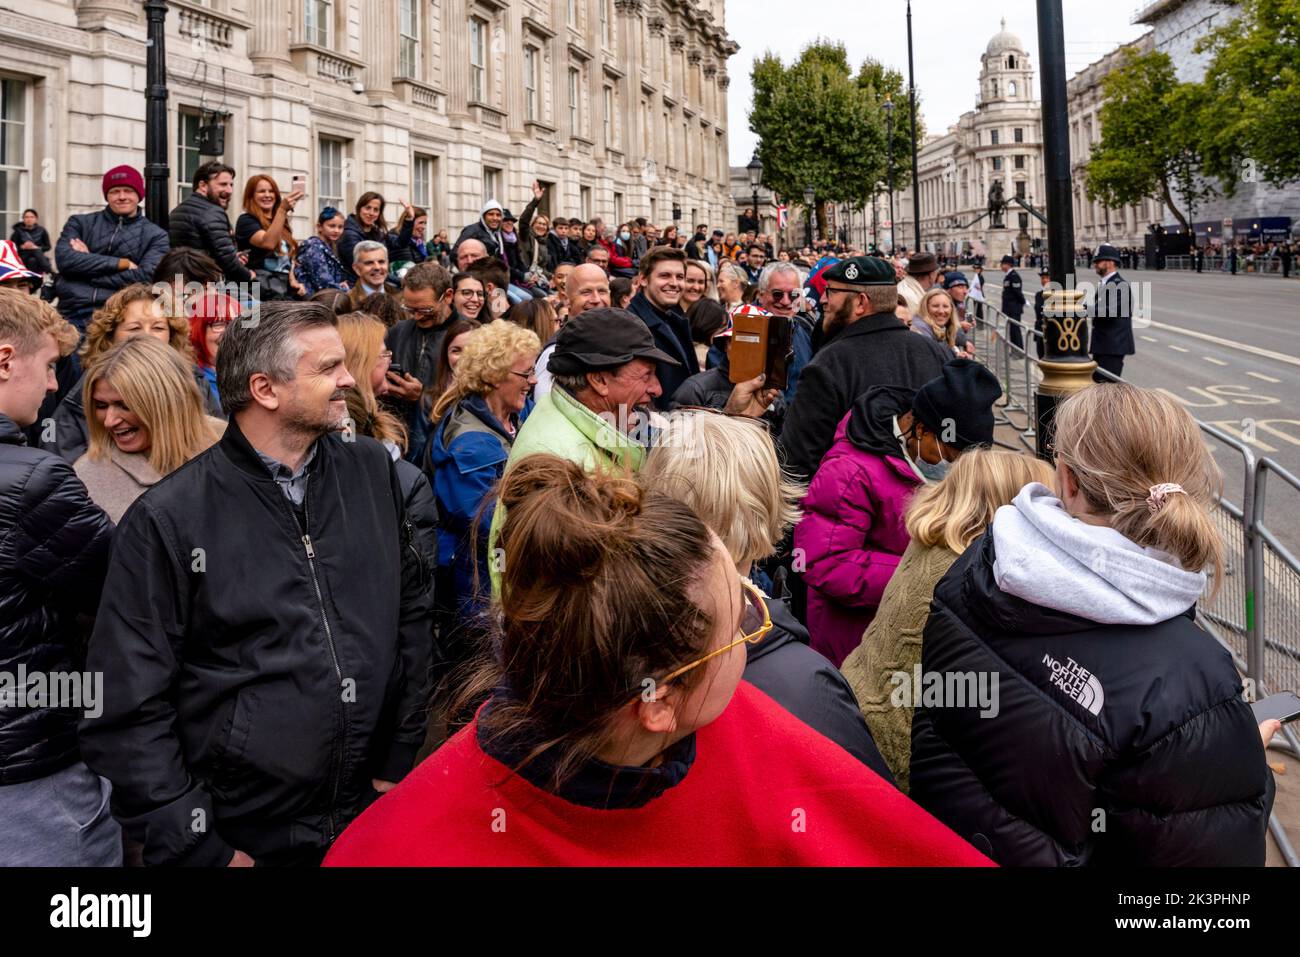 Crowds Of People Come To London To Watch The Queen's Funeral, Whitehall, London, UK. Stock Photo